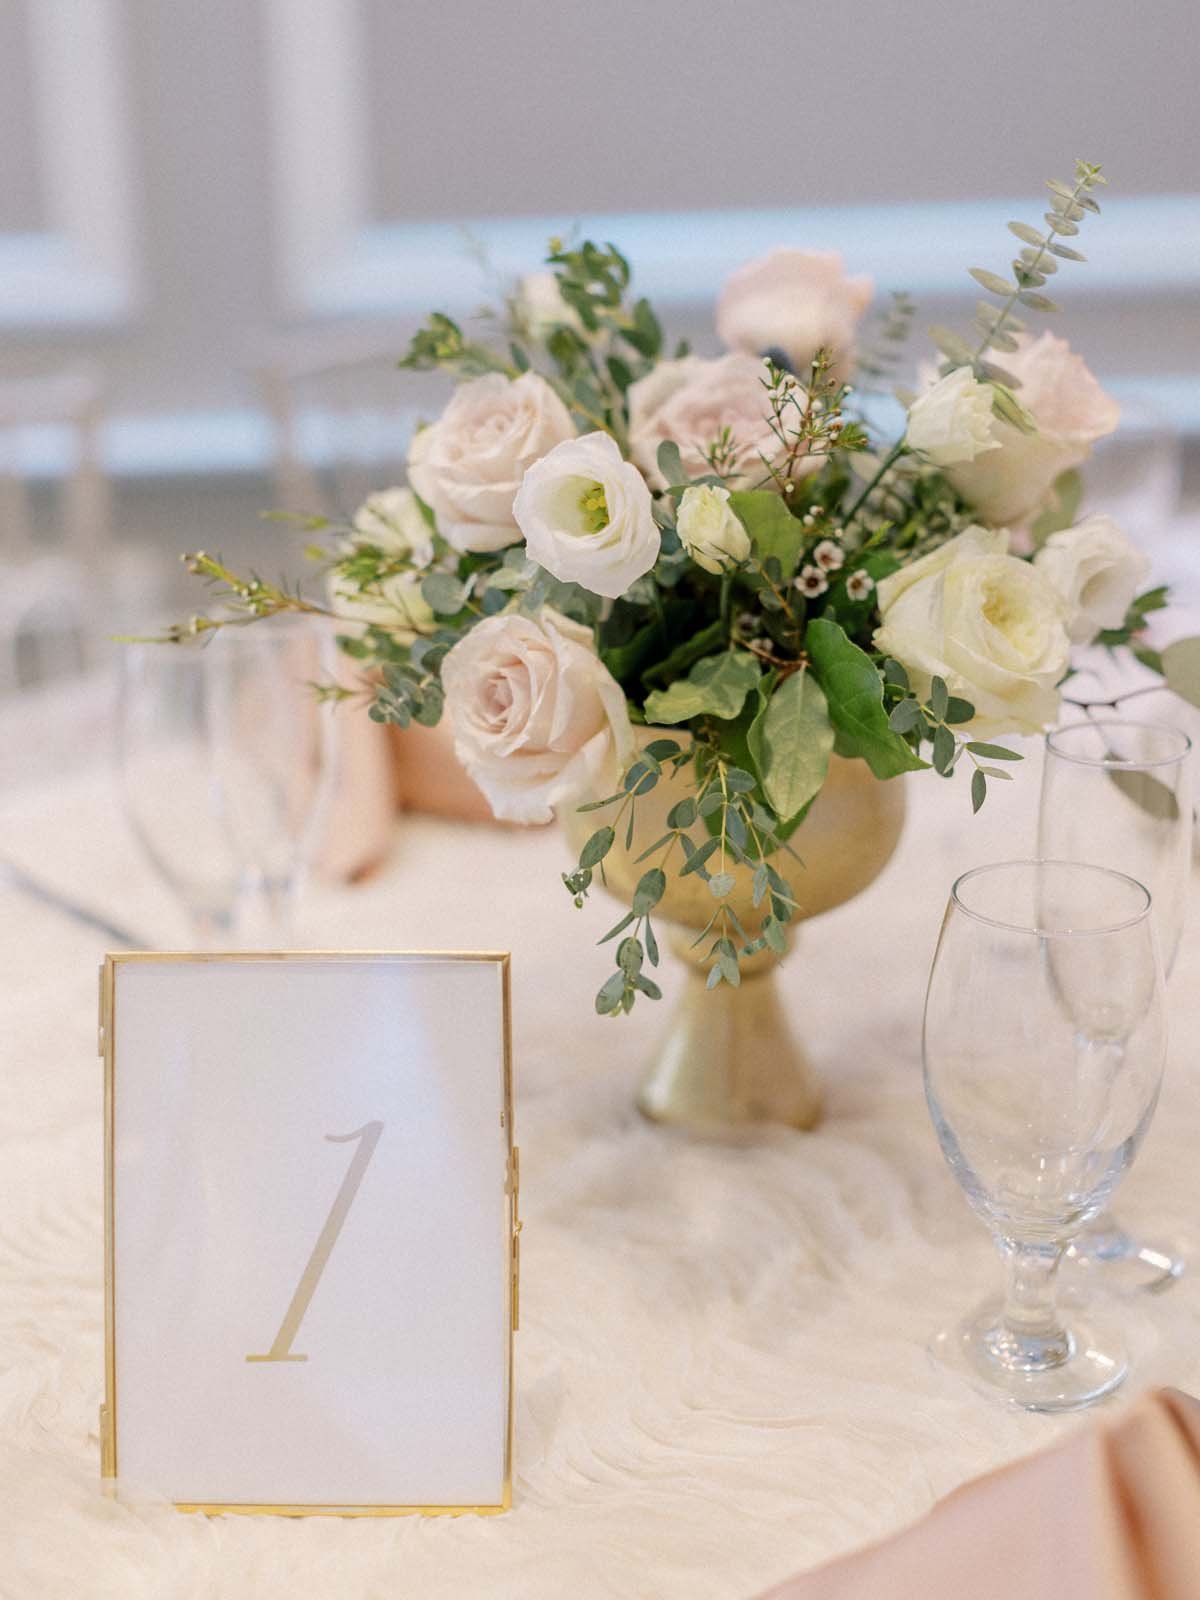 pink and white wedding centerpieces in gold vases